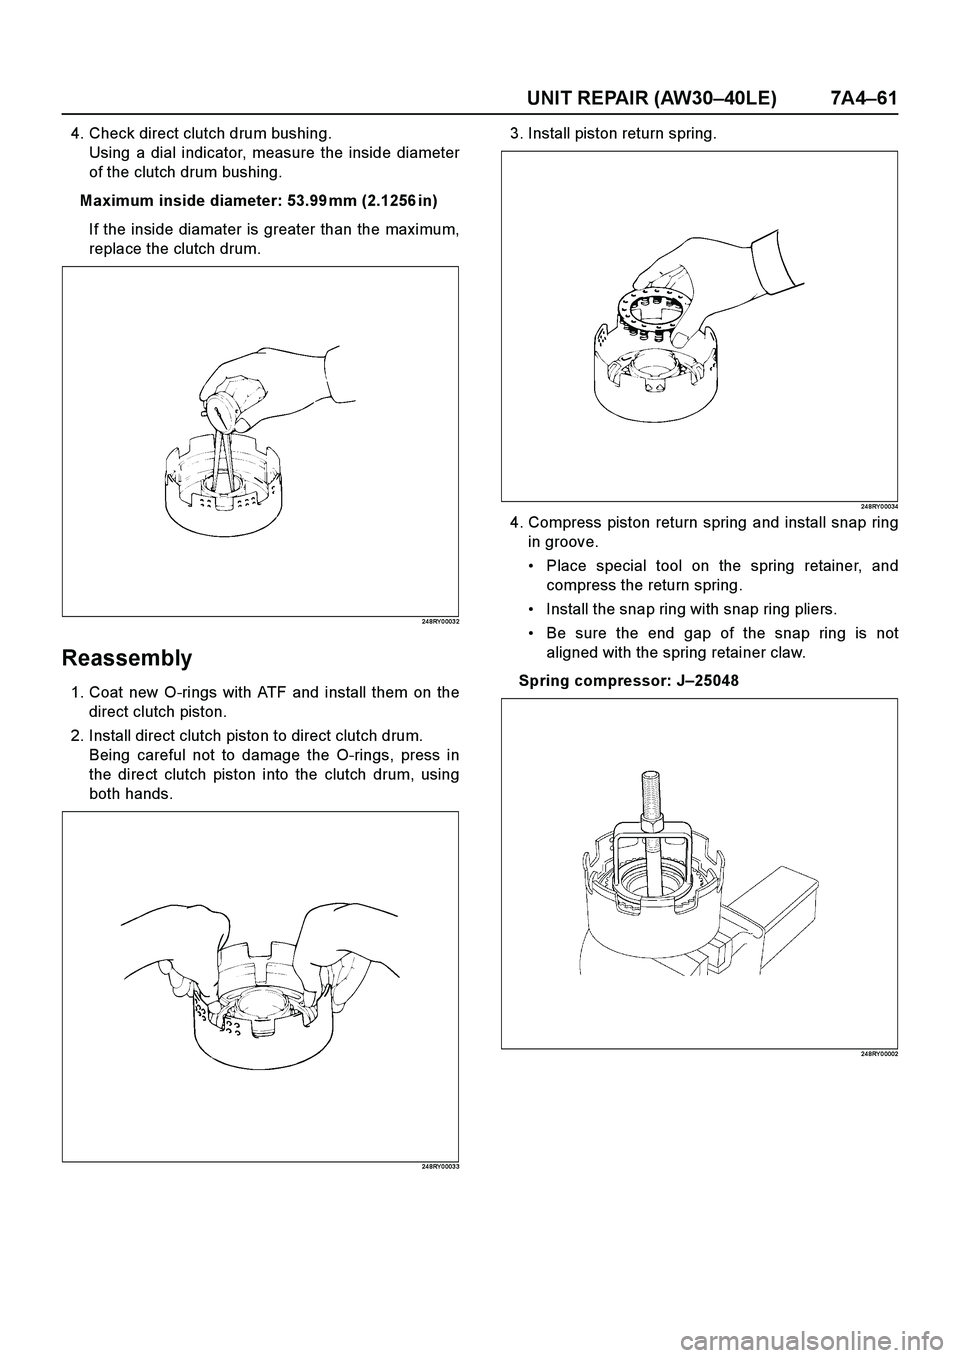 ISUZU TF SERIES 2004  Workshop Manual UNIT REPAIR (AW30–40LE) 7A4–61
4. Check direct clutch drum bushing.
Using a dial indicator, measure the inside diameter
of the clutch drum bushing.
Maximum inside diameter: 53.99 mm (2.1256 in)
If